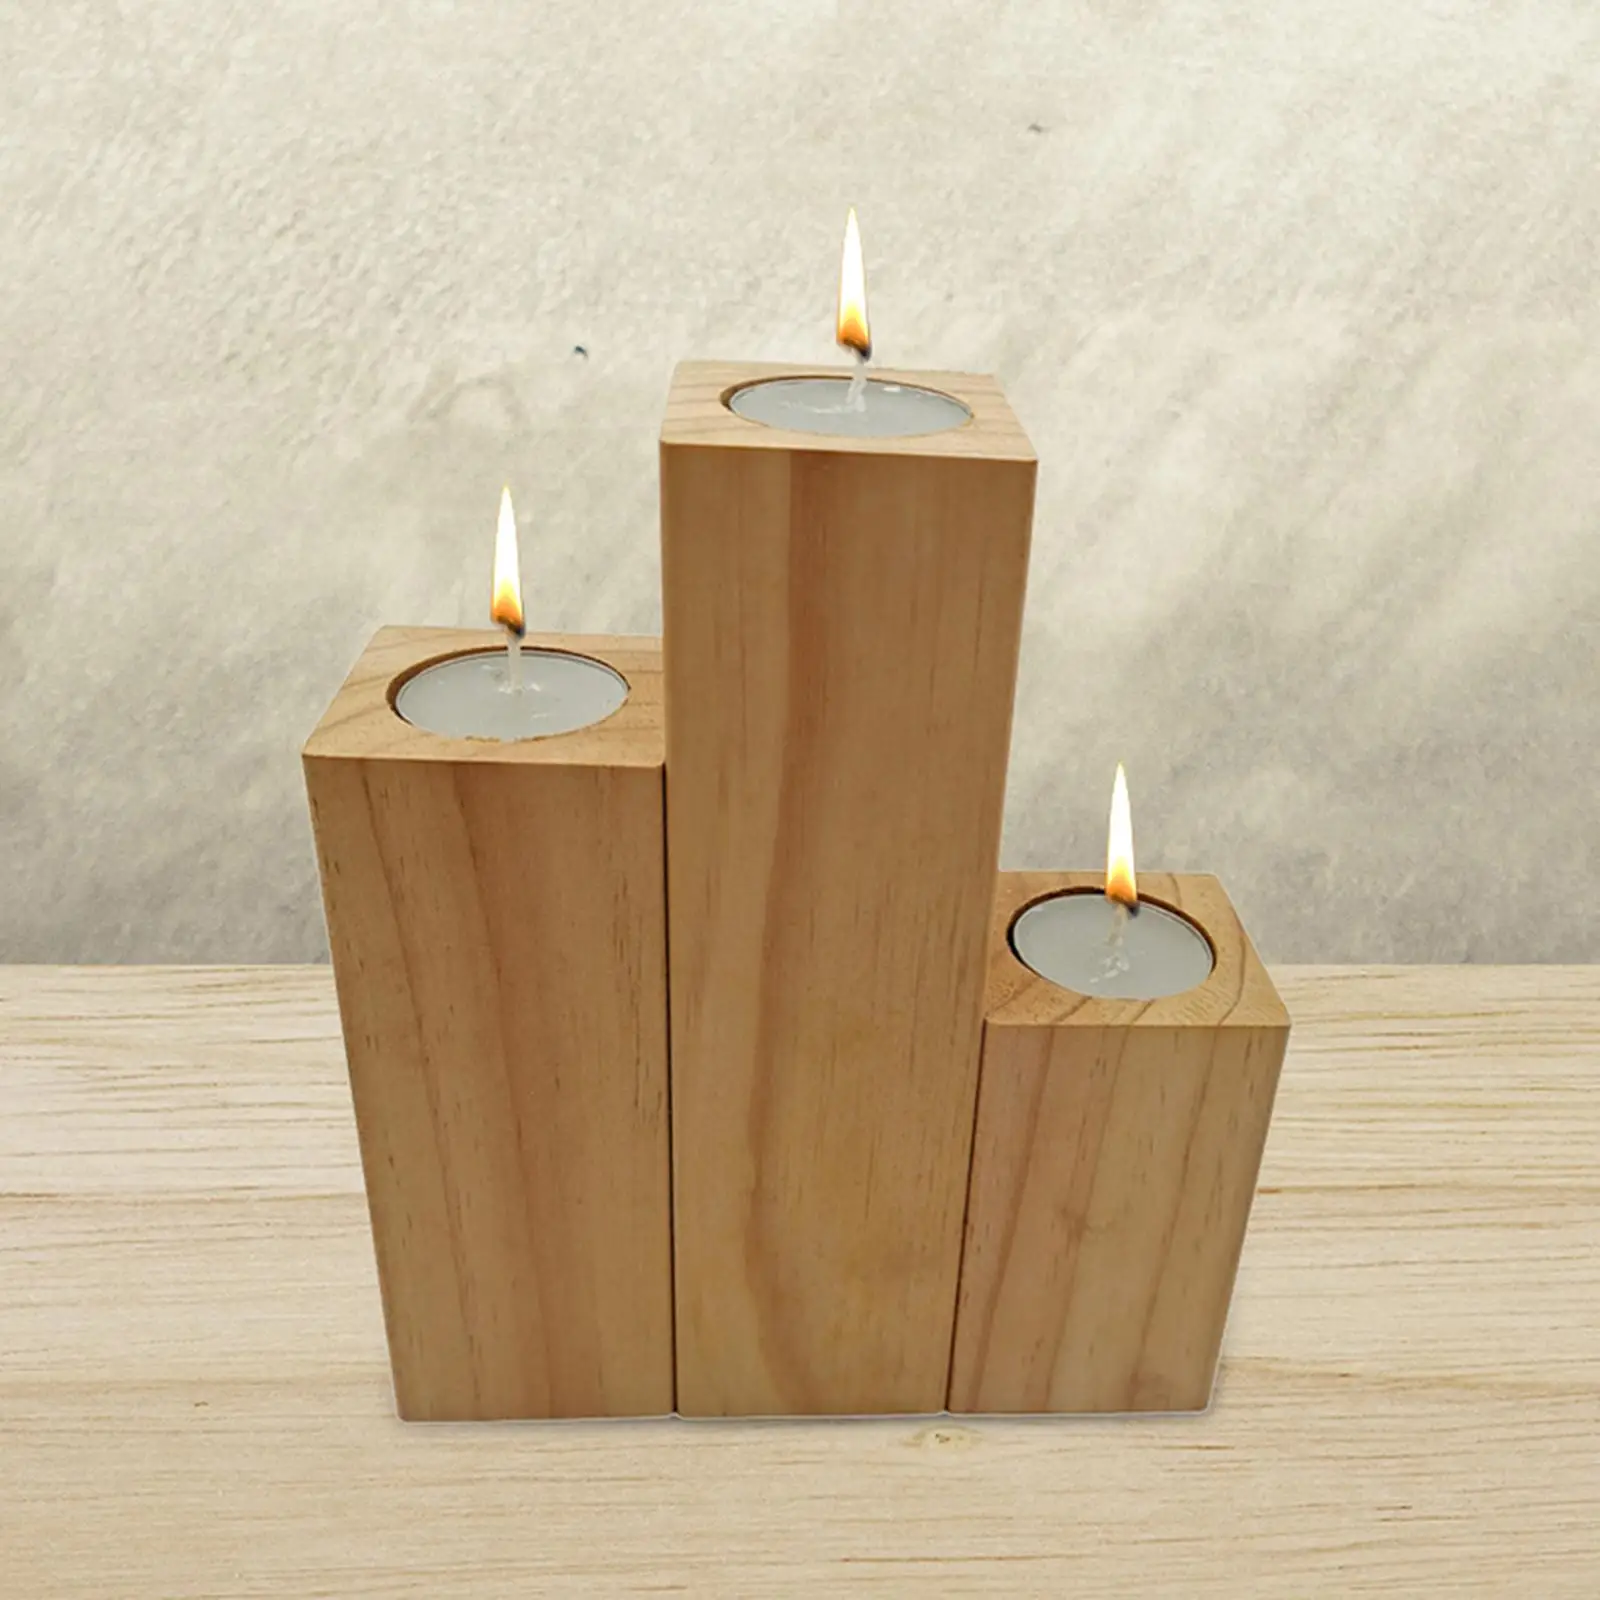 Wooden Candle Holders Sturdy Elegant Crafts Candle Base Retro Candlestick Practical for Farmhouse Holiday Bathroom Tabletop Home